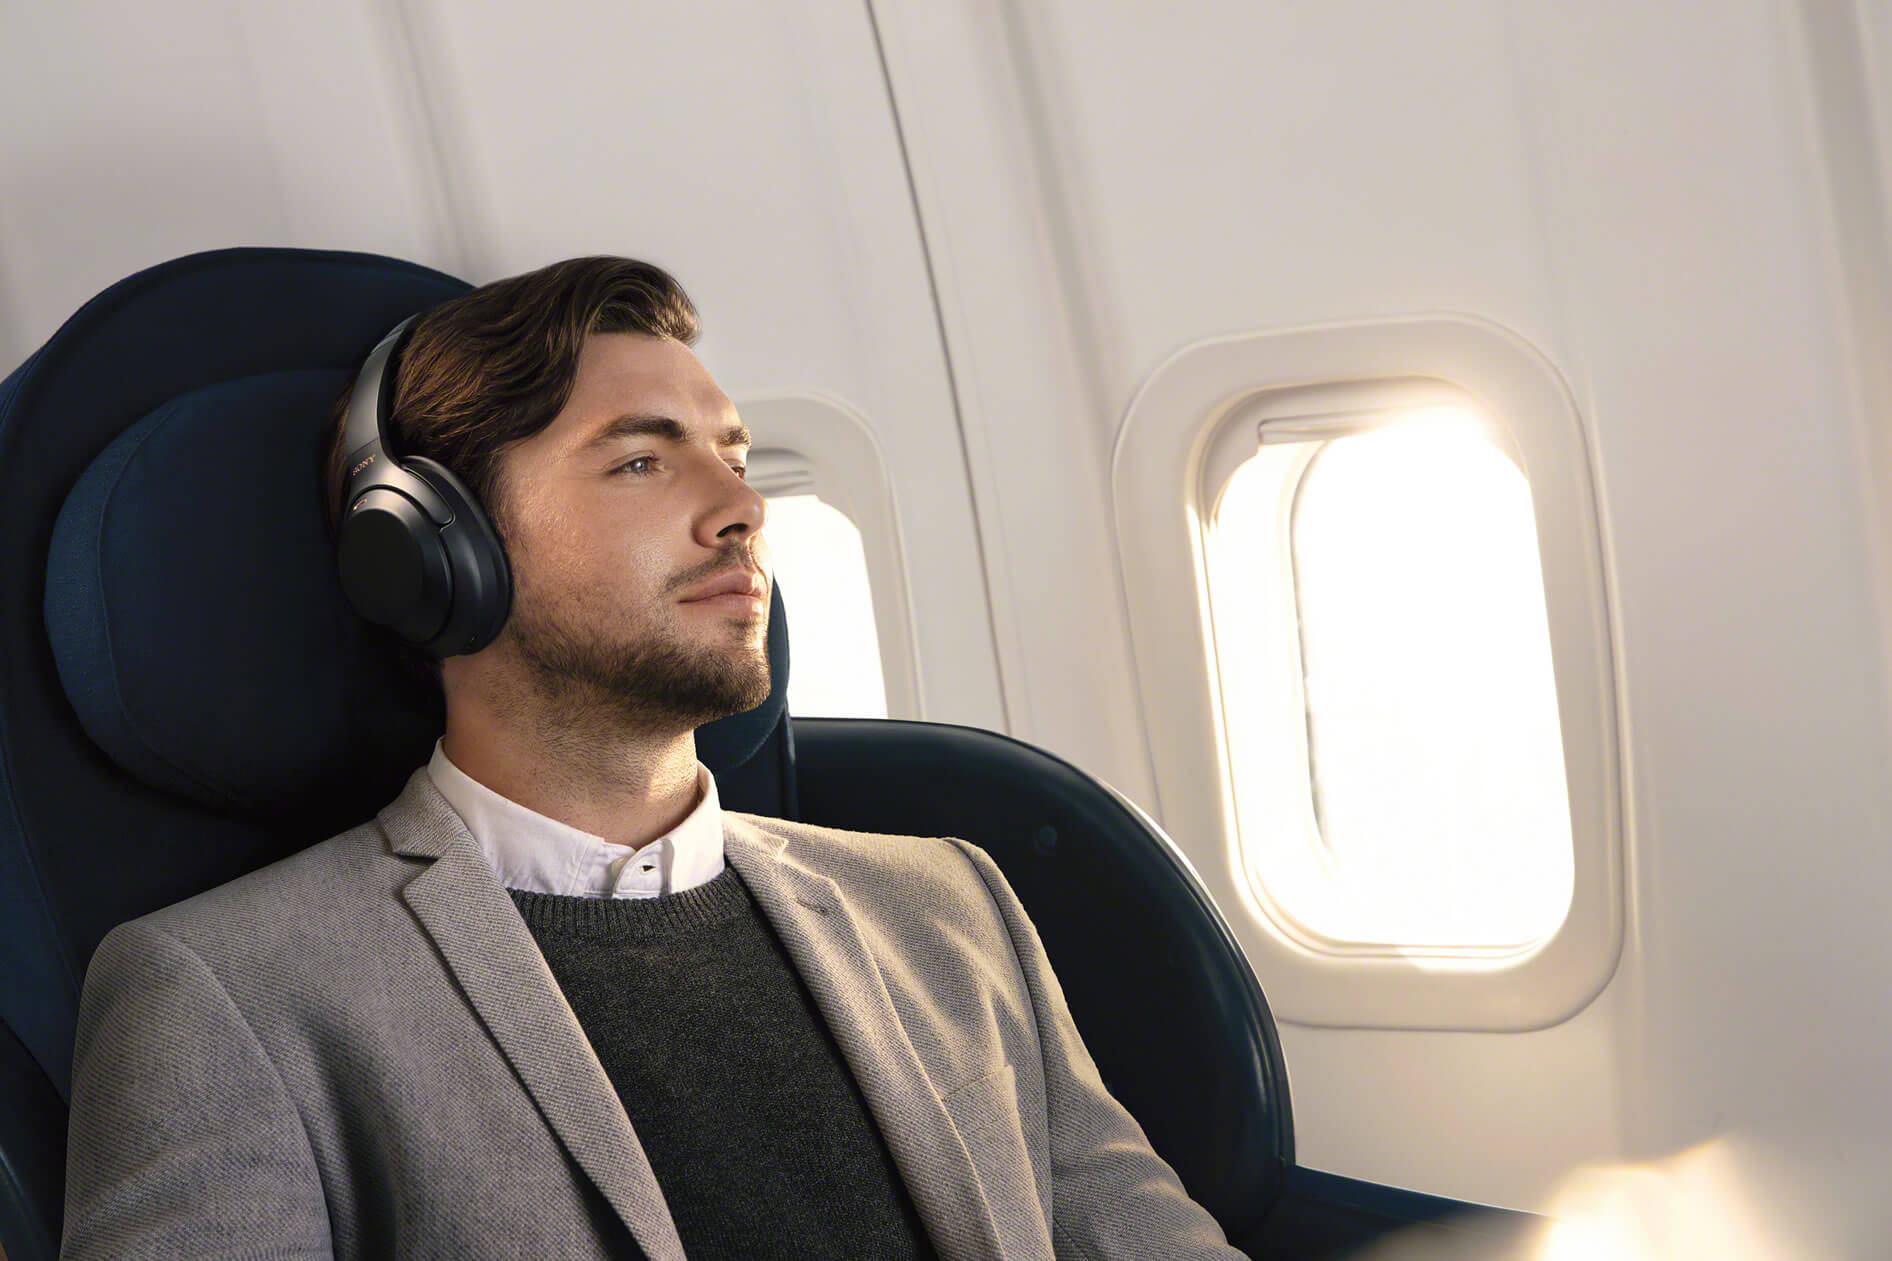 Apple Music subscribers will be able to stream music for free on American Airlines